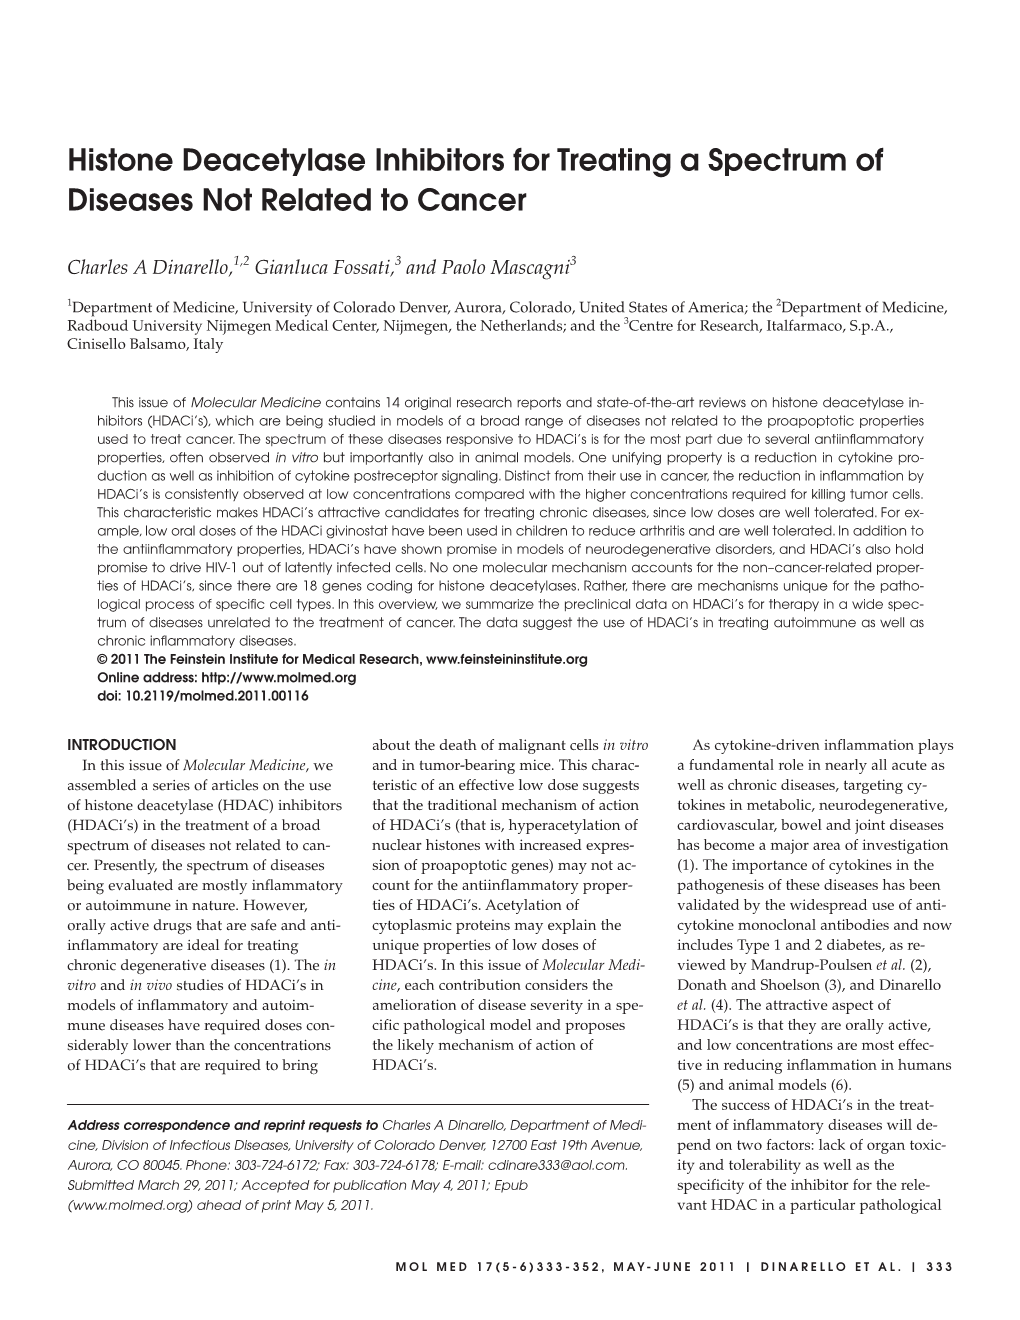 Histone Deacetylase Inhibitors for Treating a Spectrum of Diseases Not Related to Cancer